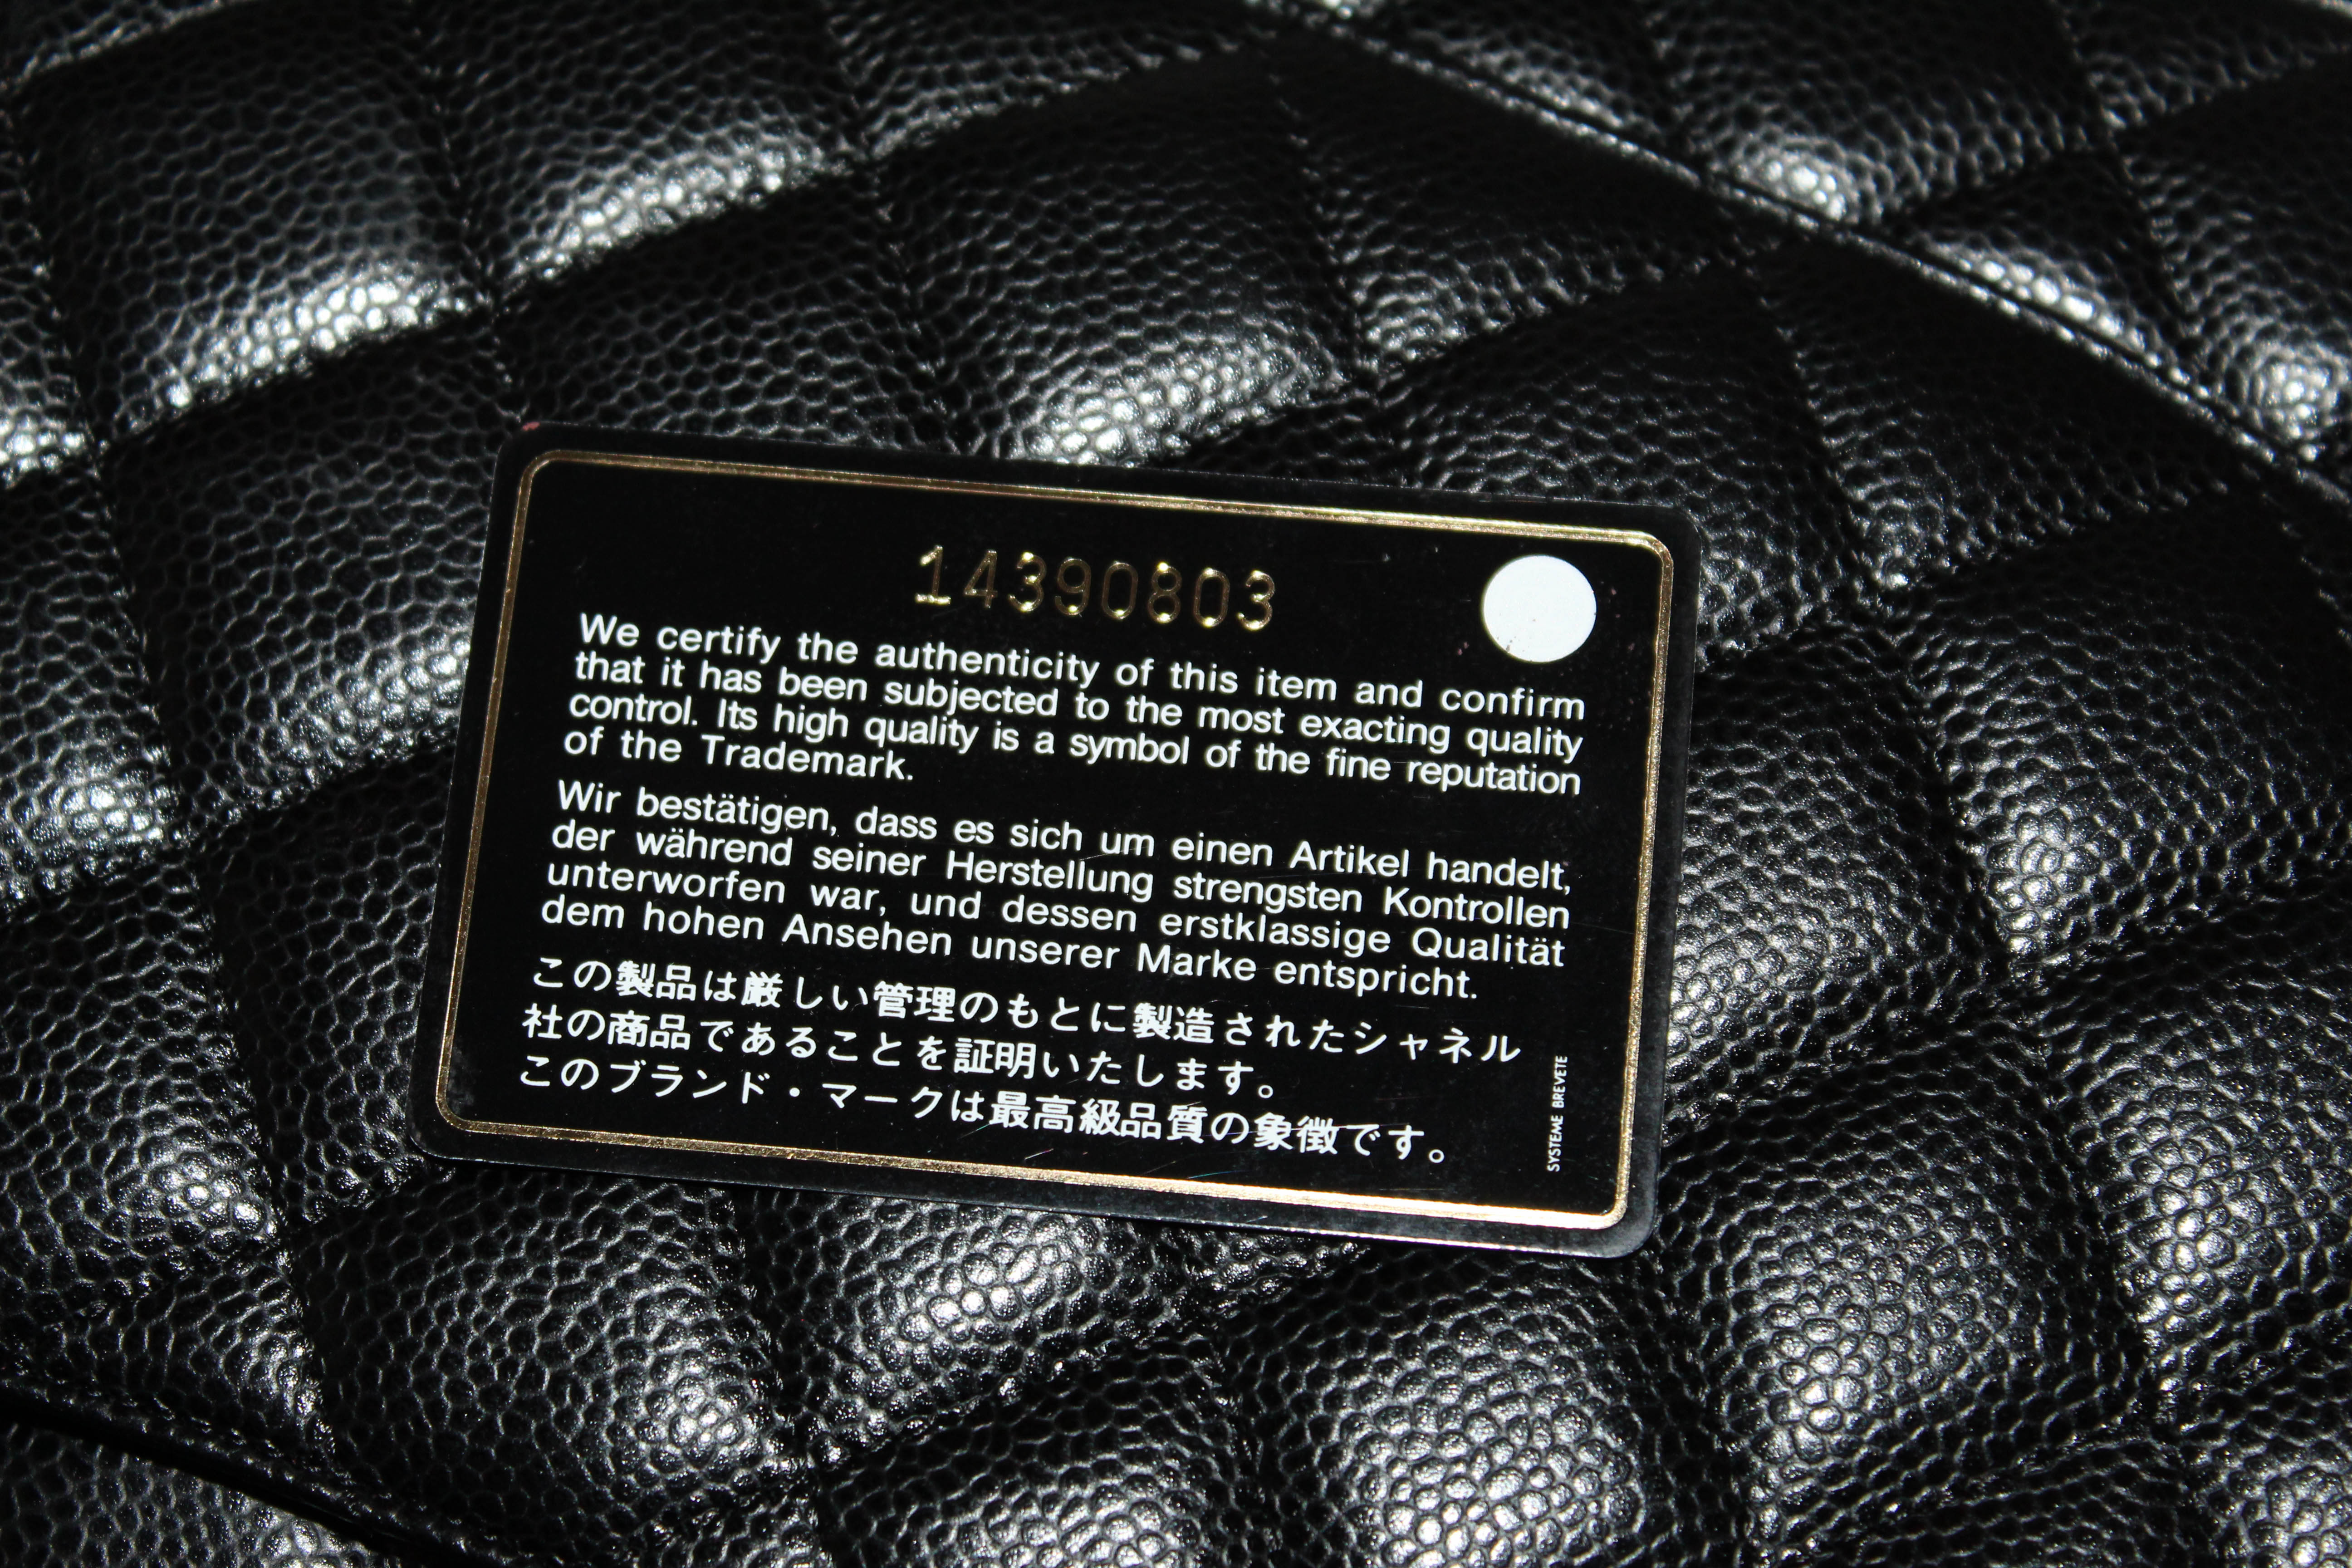 Authentic Chanel Black Quilted Caviar Leather Maxi Double Flap Bag